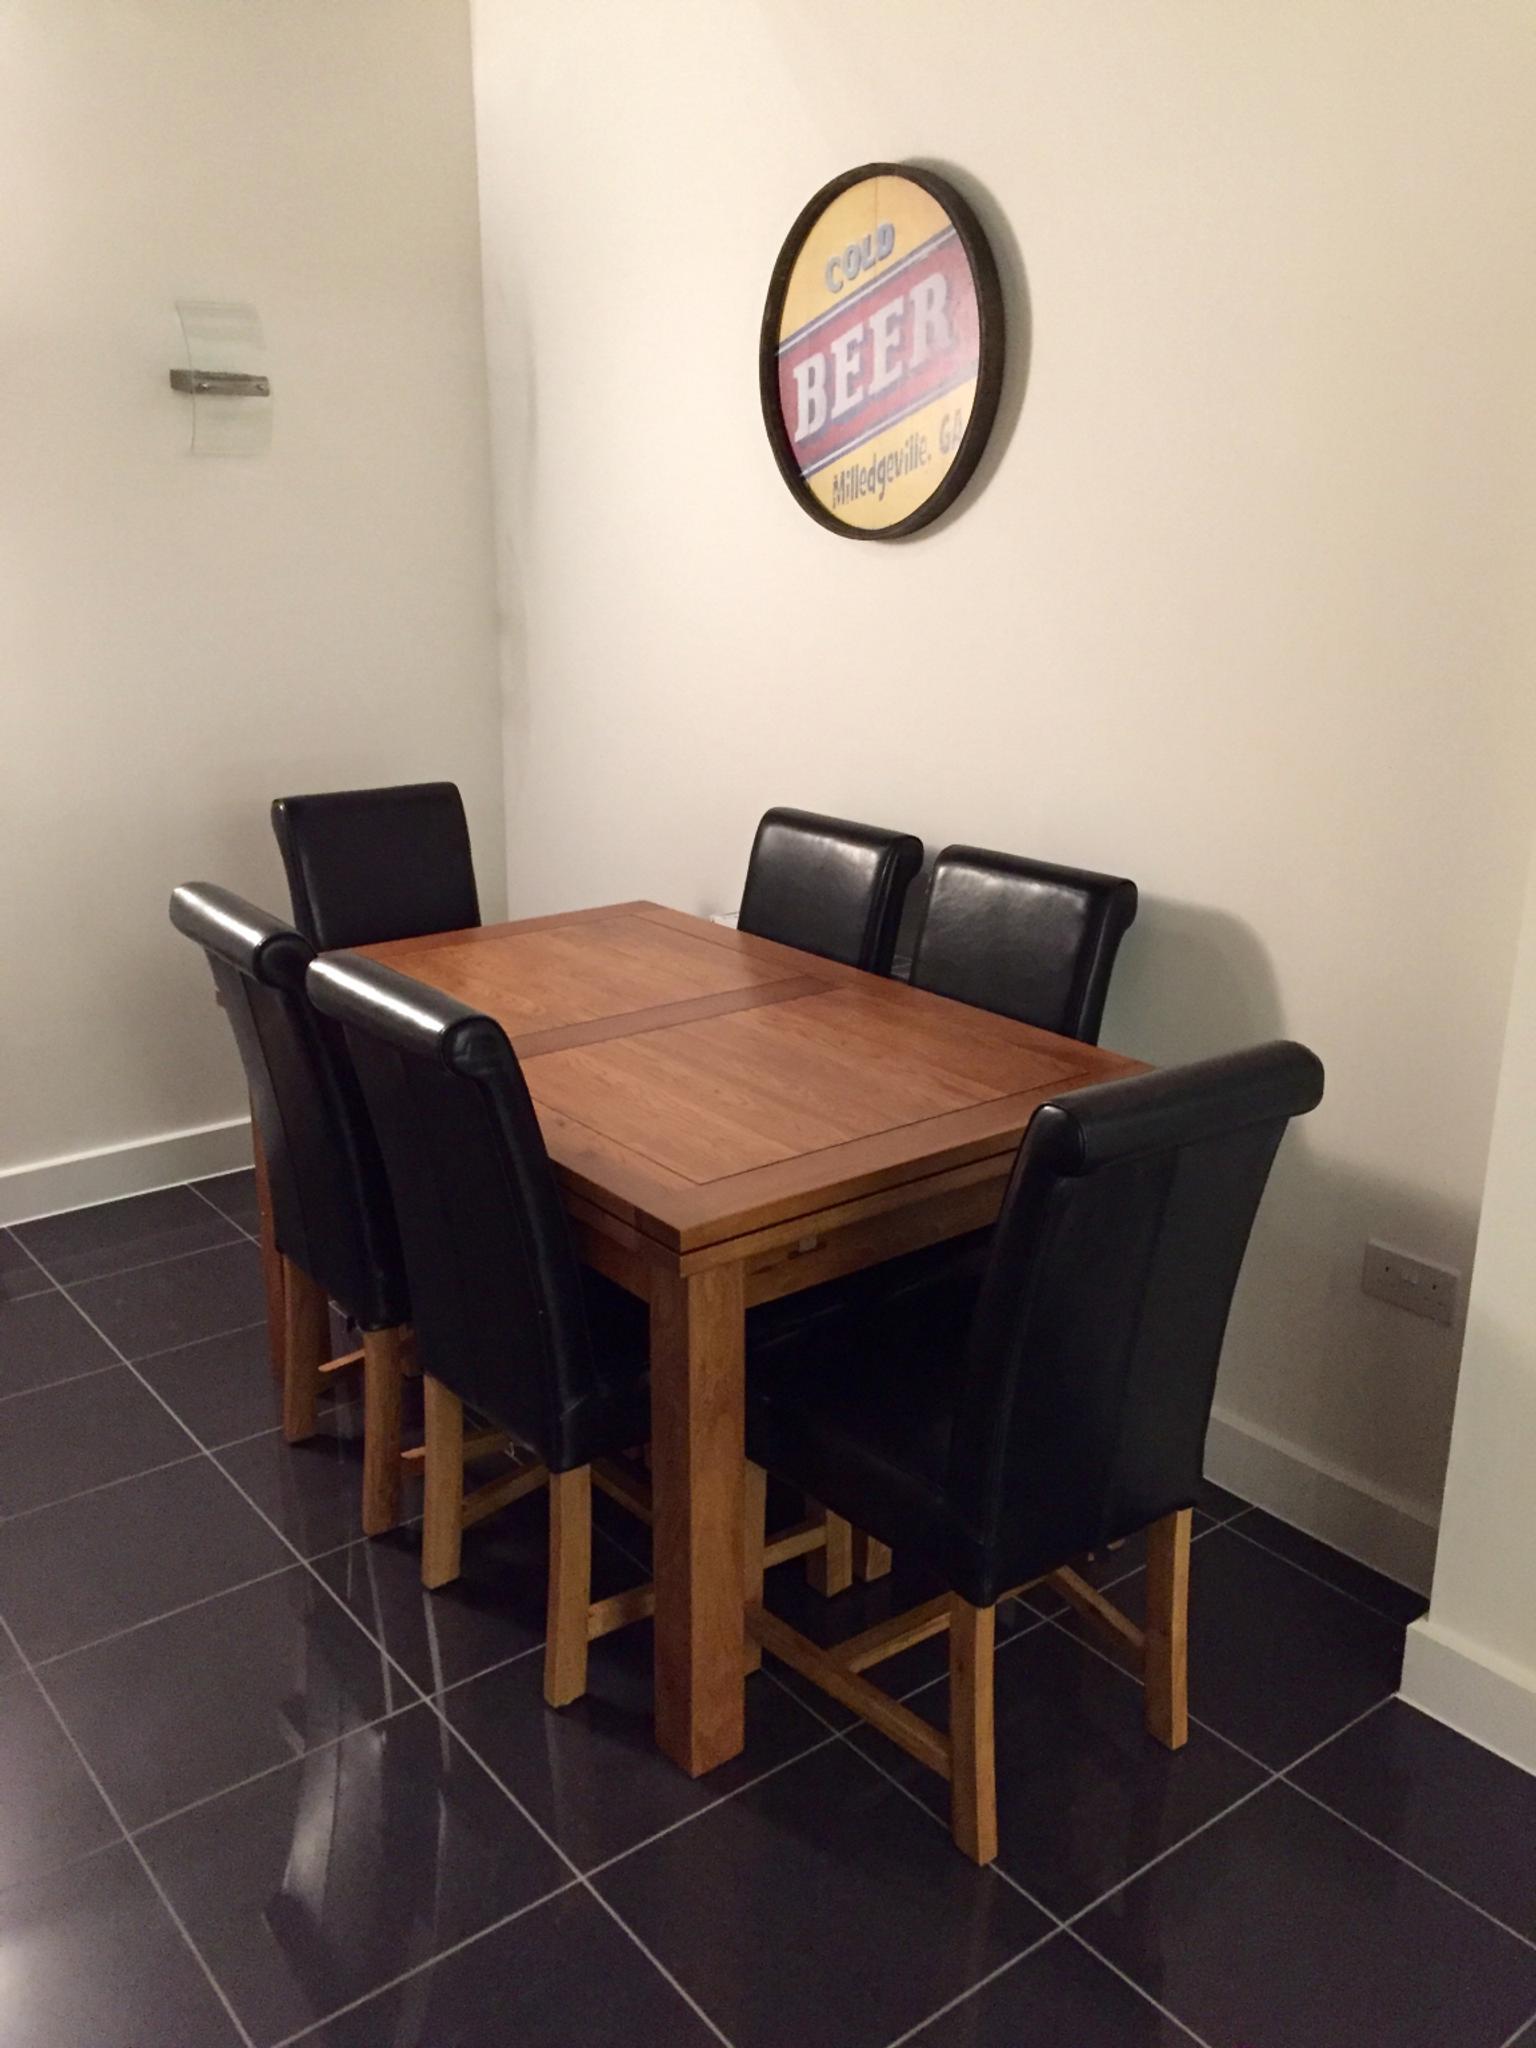 Oak Dining Table Extendable 6 8 Seats In Gl56 Cotswold For 150 00 For Sale Shpock